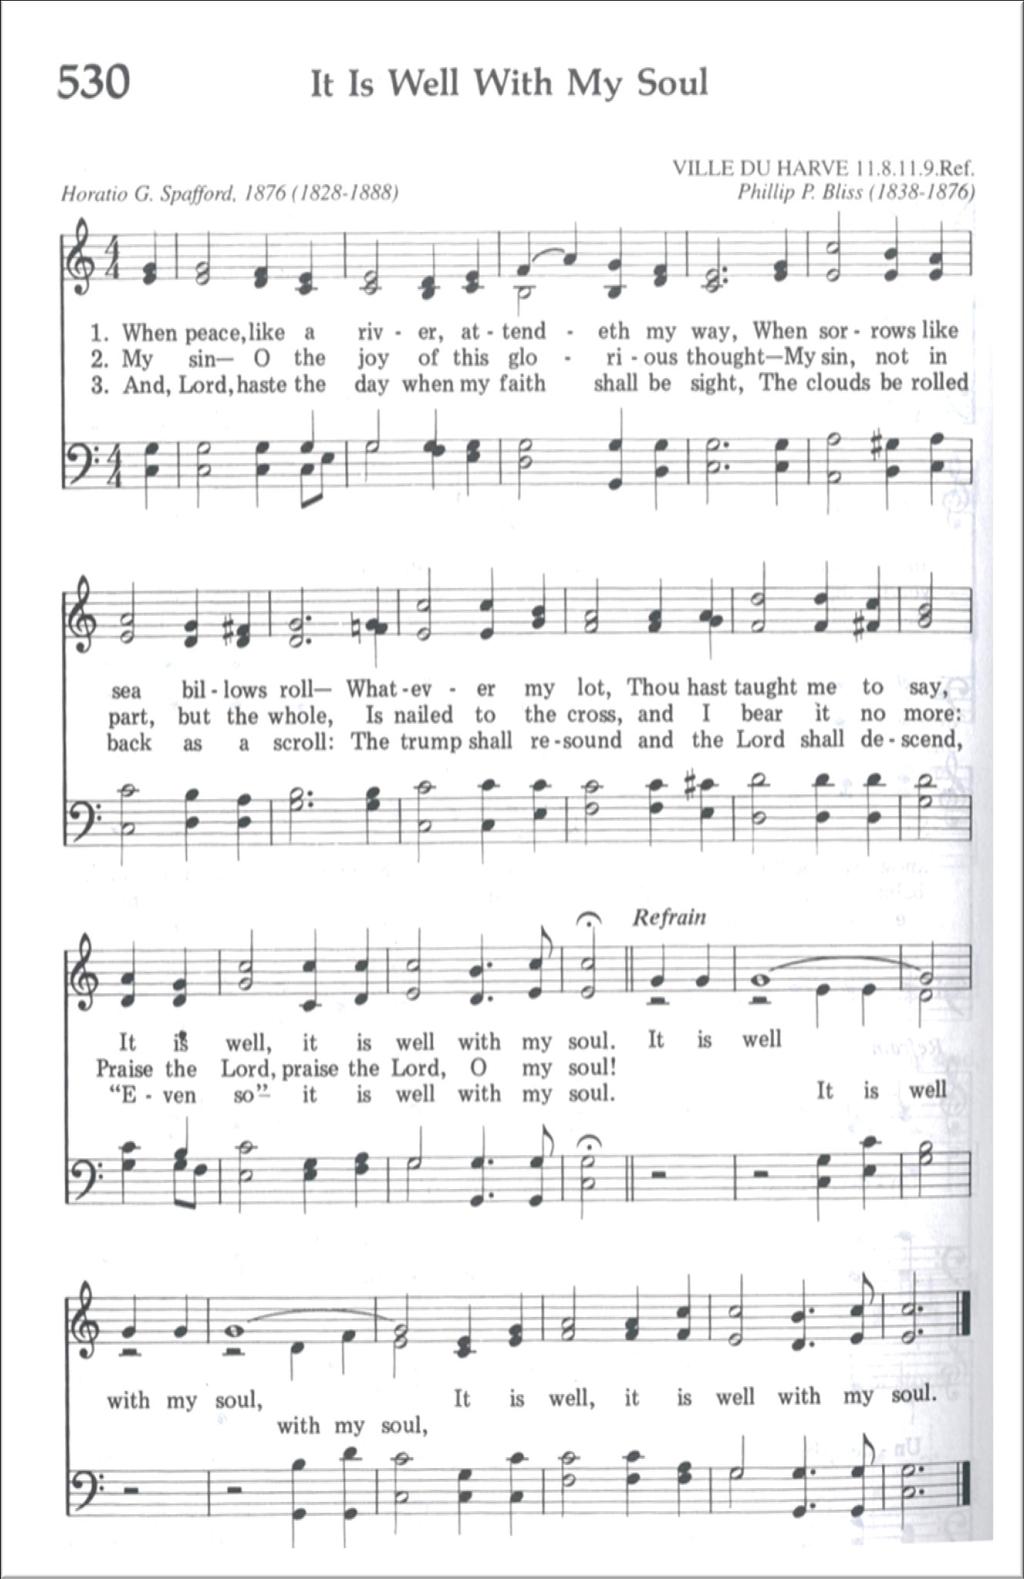 About this Hymn: This hymn was written by Horatio Spafford, a devout Christian and prominent Chicago lawyer, who upon reaching the pinnacle of his profession and financial success suffered the loss